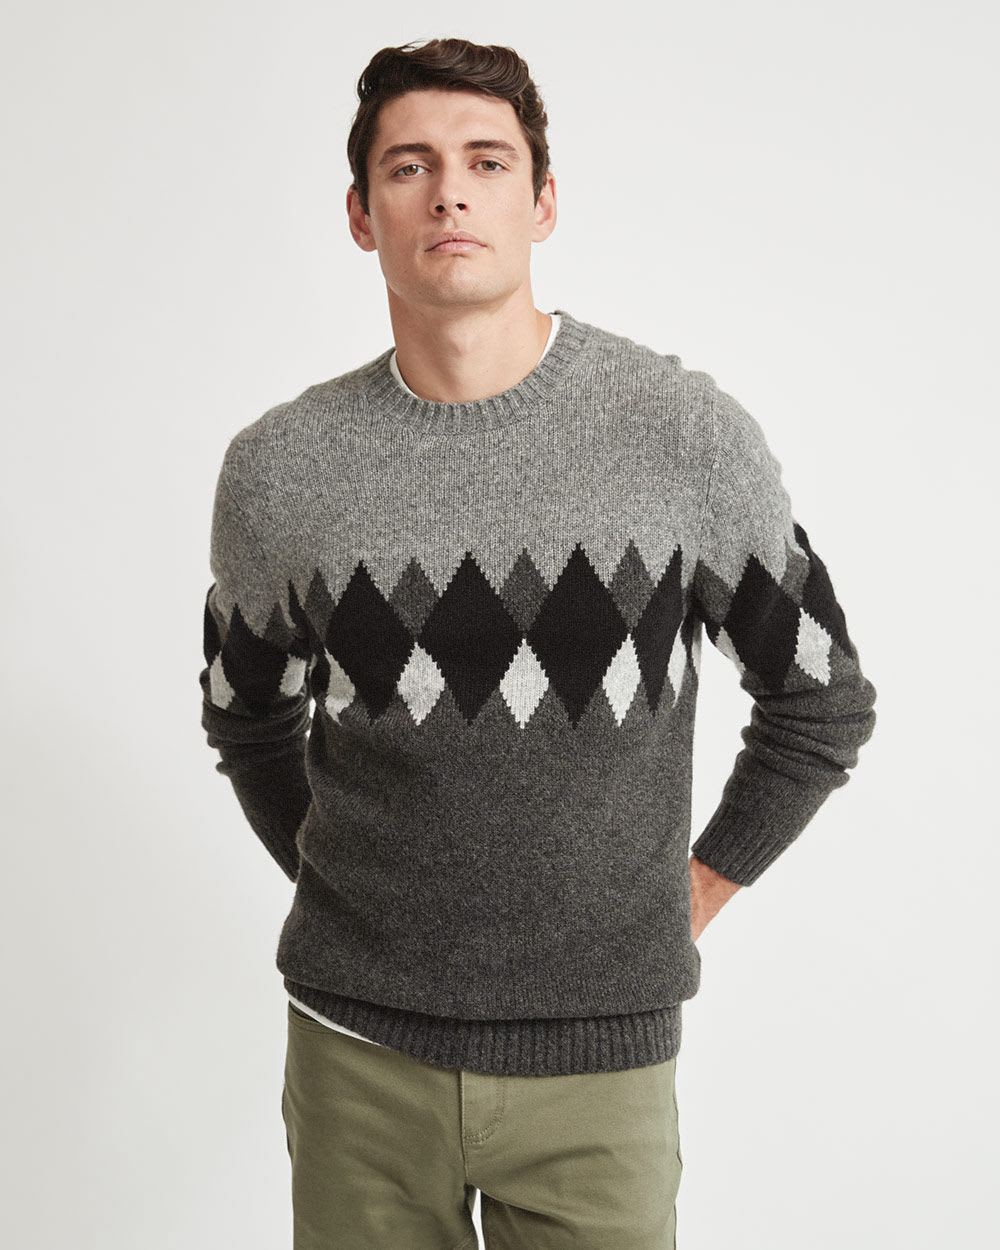 Crew Neck Pullover Sweater with Argyle Pattern | RW&CO.